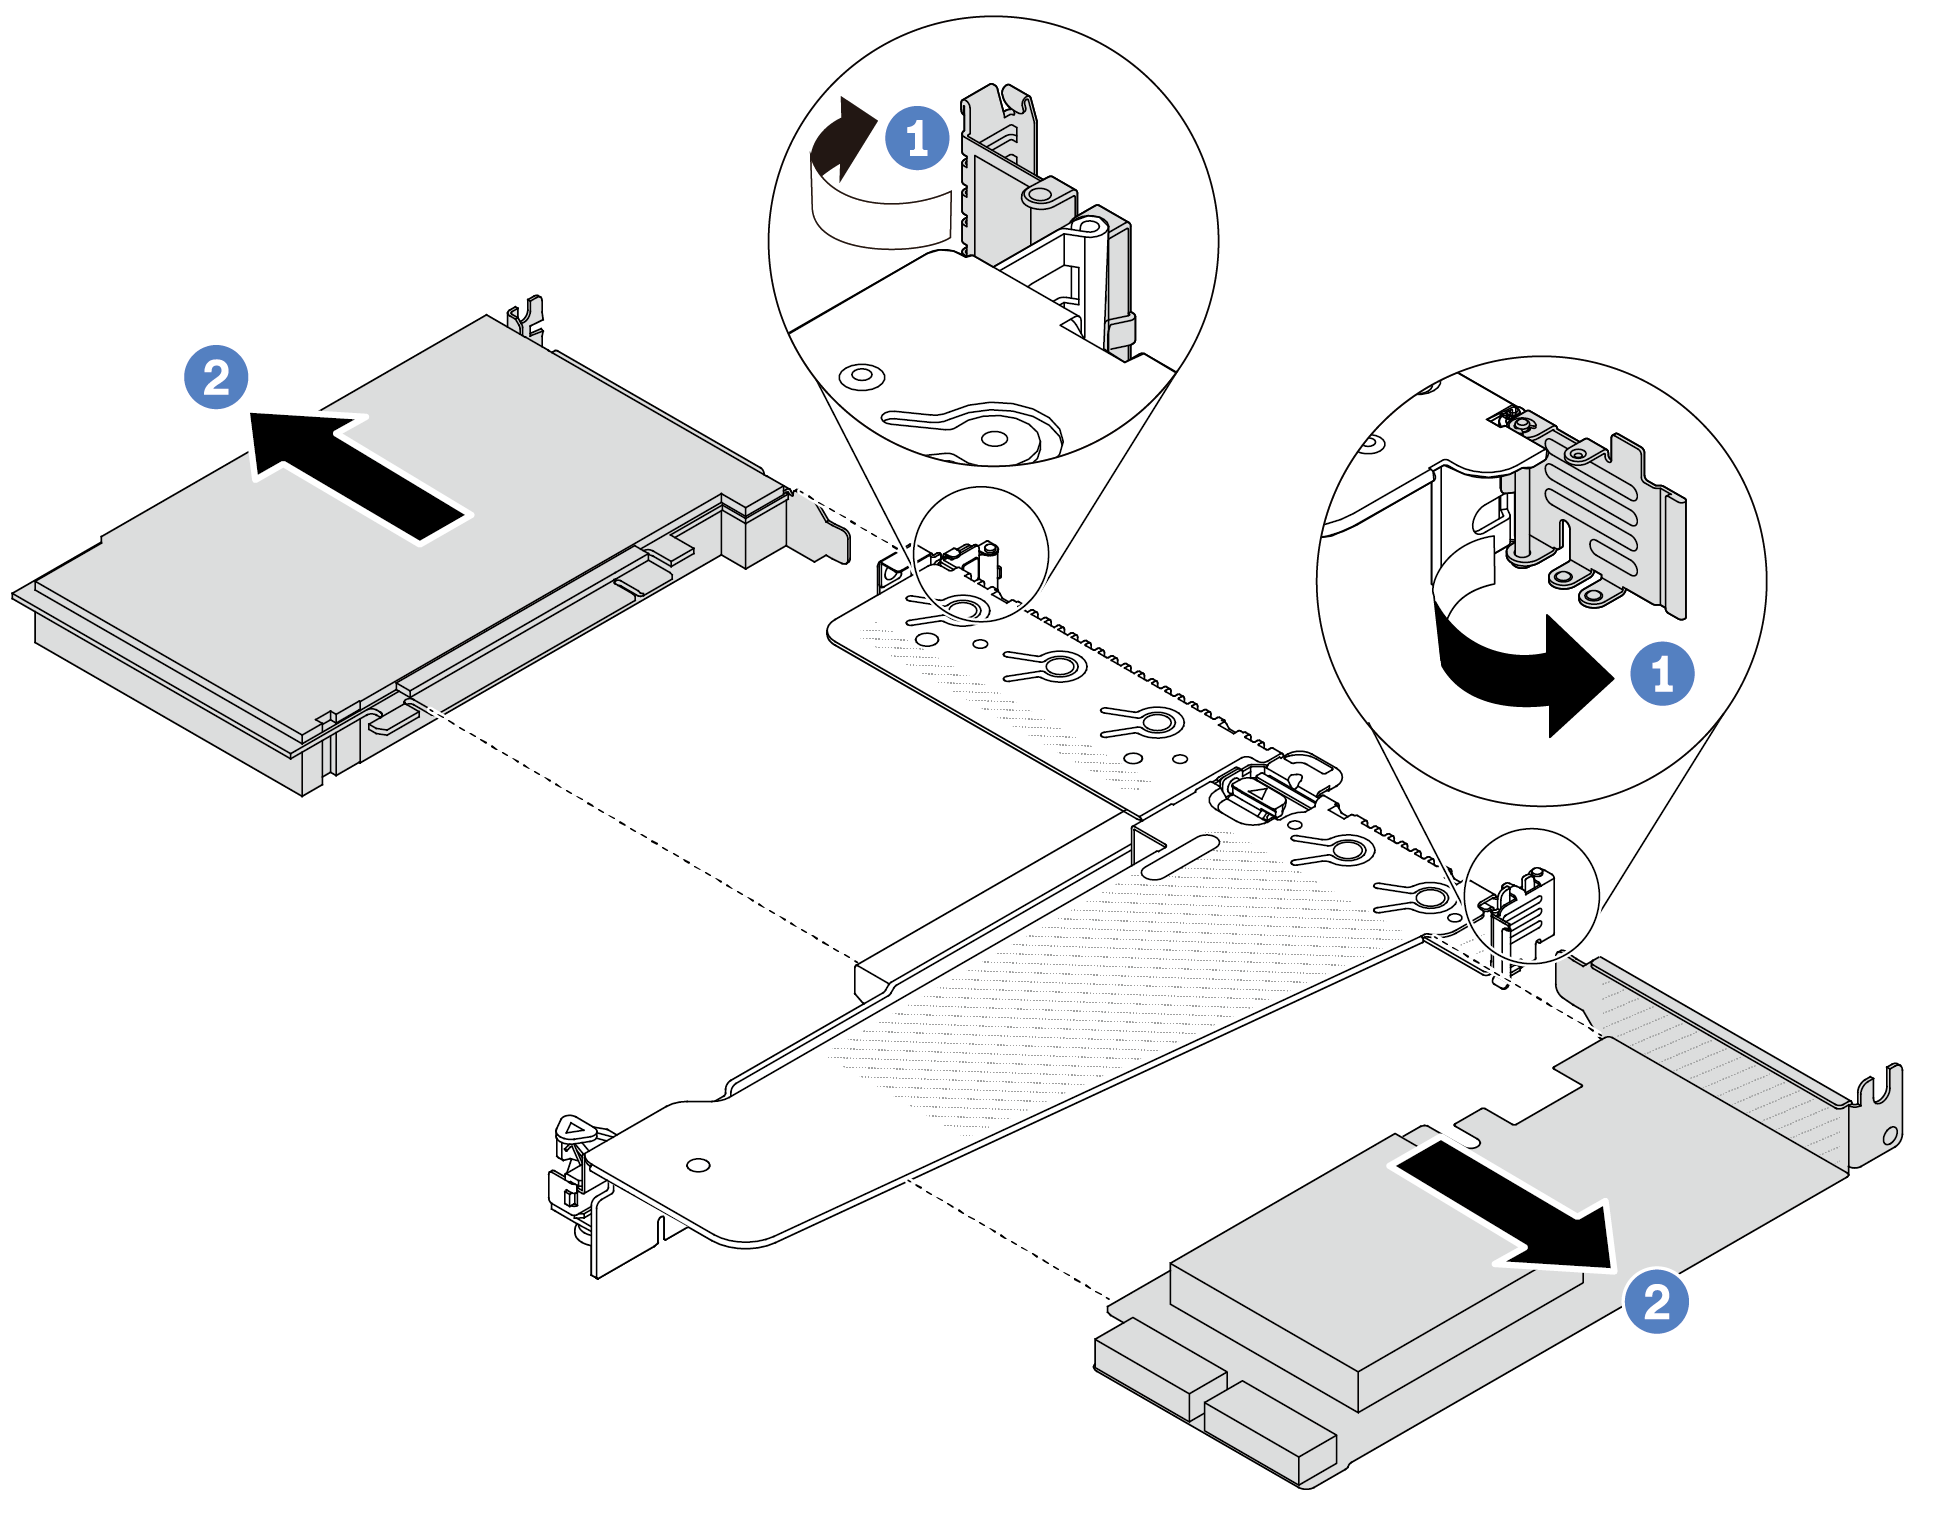 Removing PCIe adapters from the LP-FH riser assembly